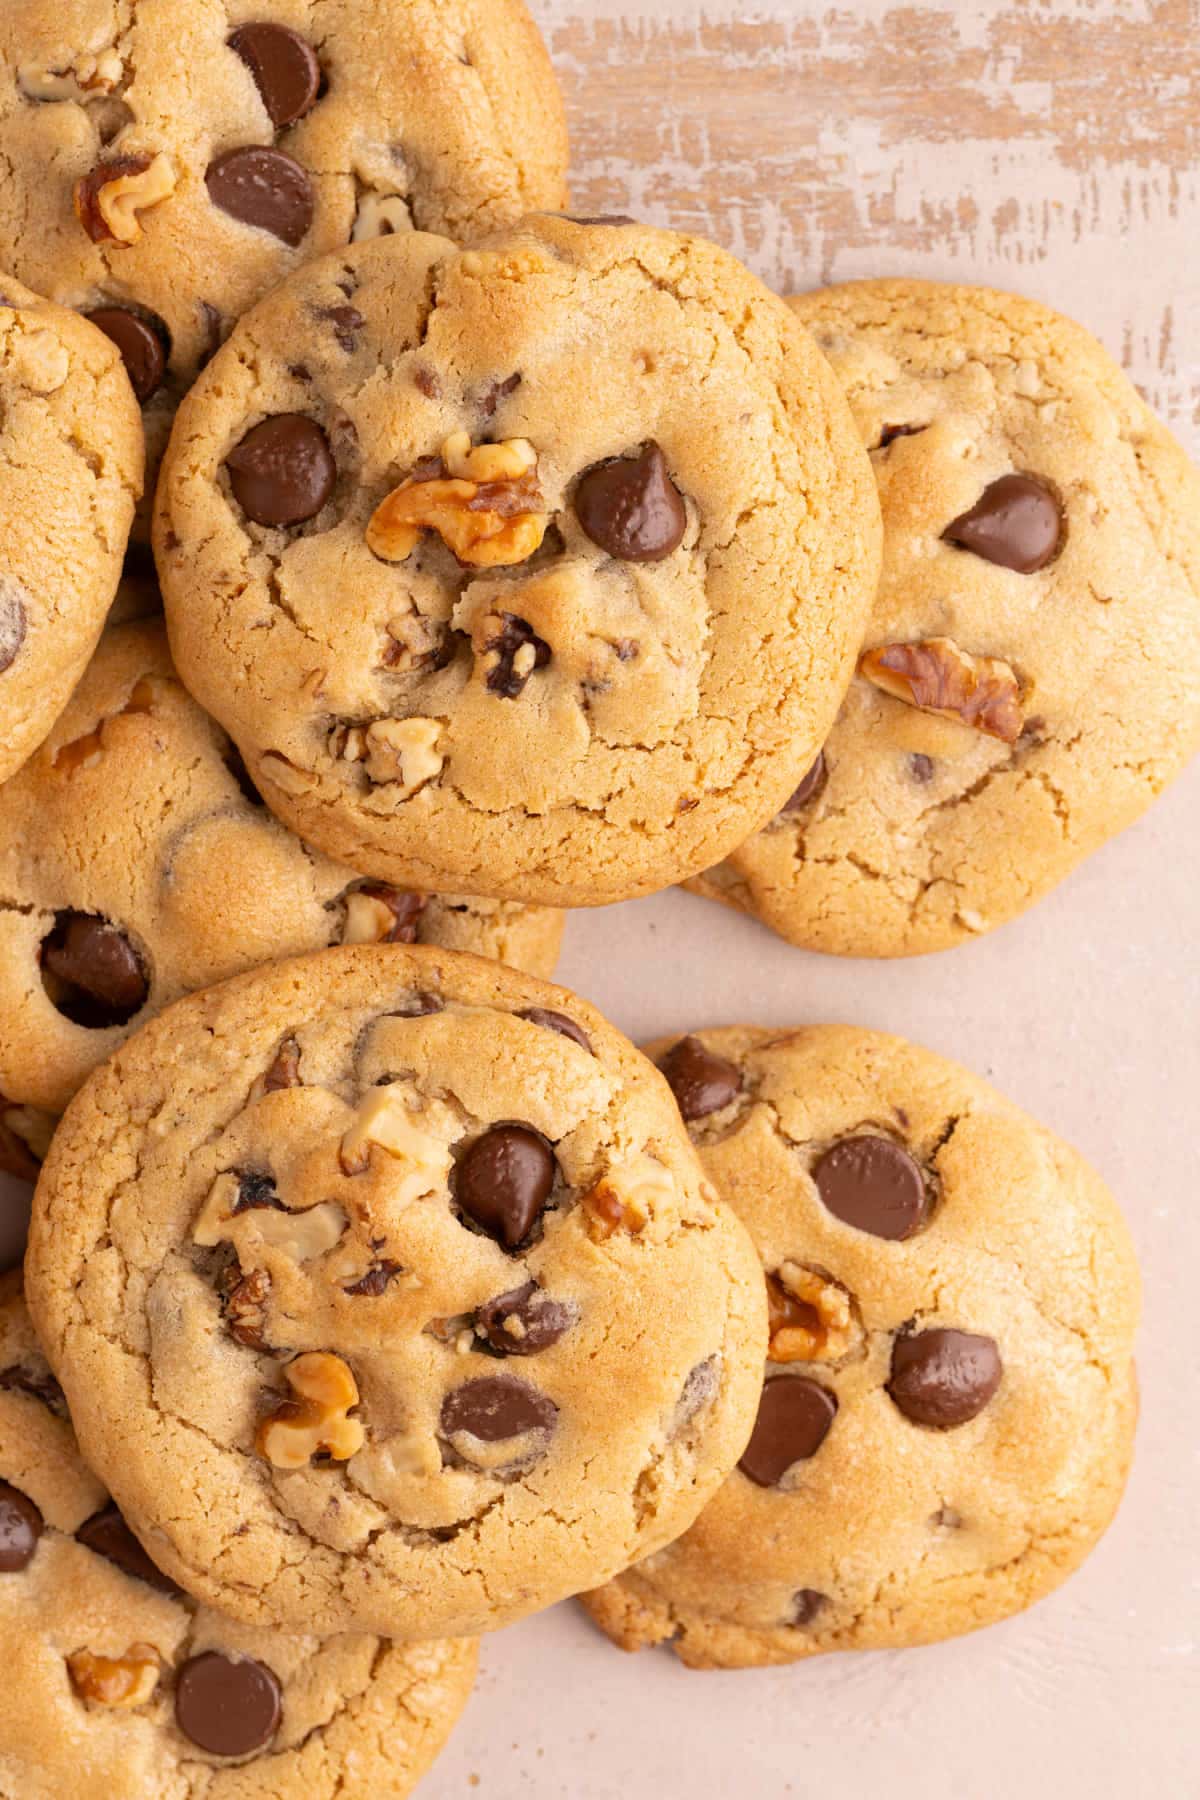 Overhead image of Chocolate Chip Walnut Cookies piled on top of each other.